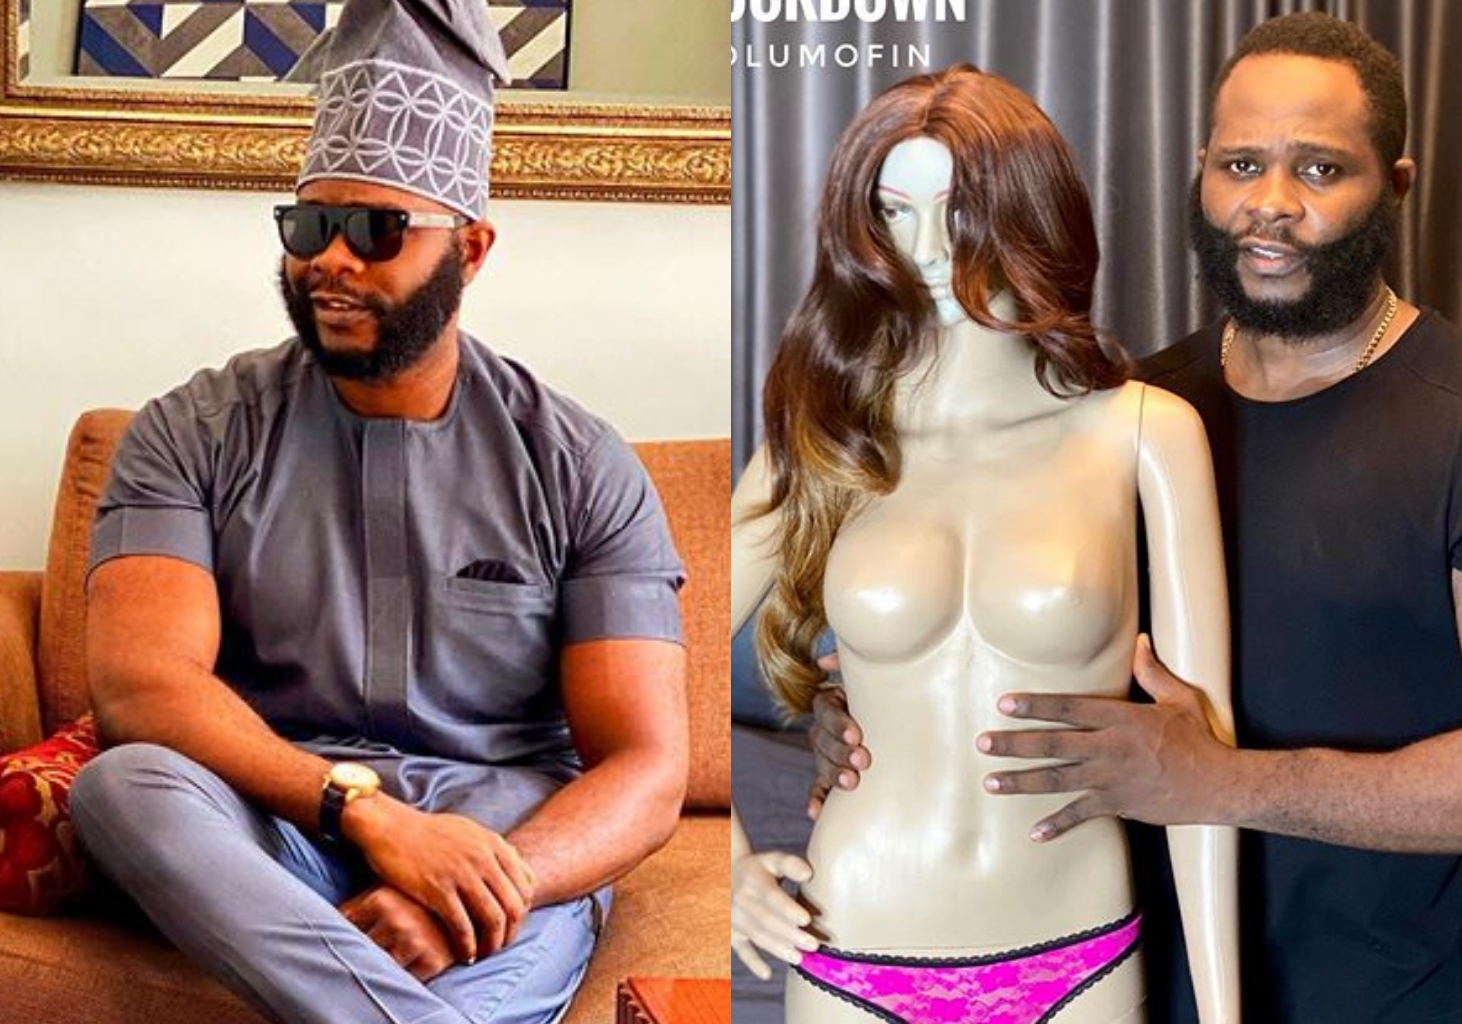 If your lady has not reached an Orgasm this lockdown, you’re not a man – Joro Olumofin